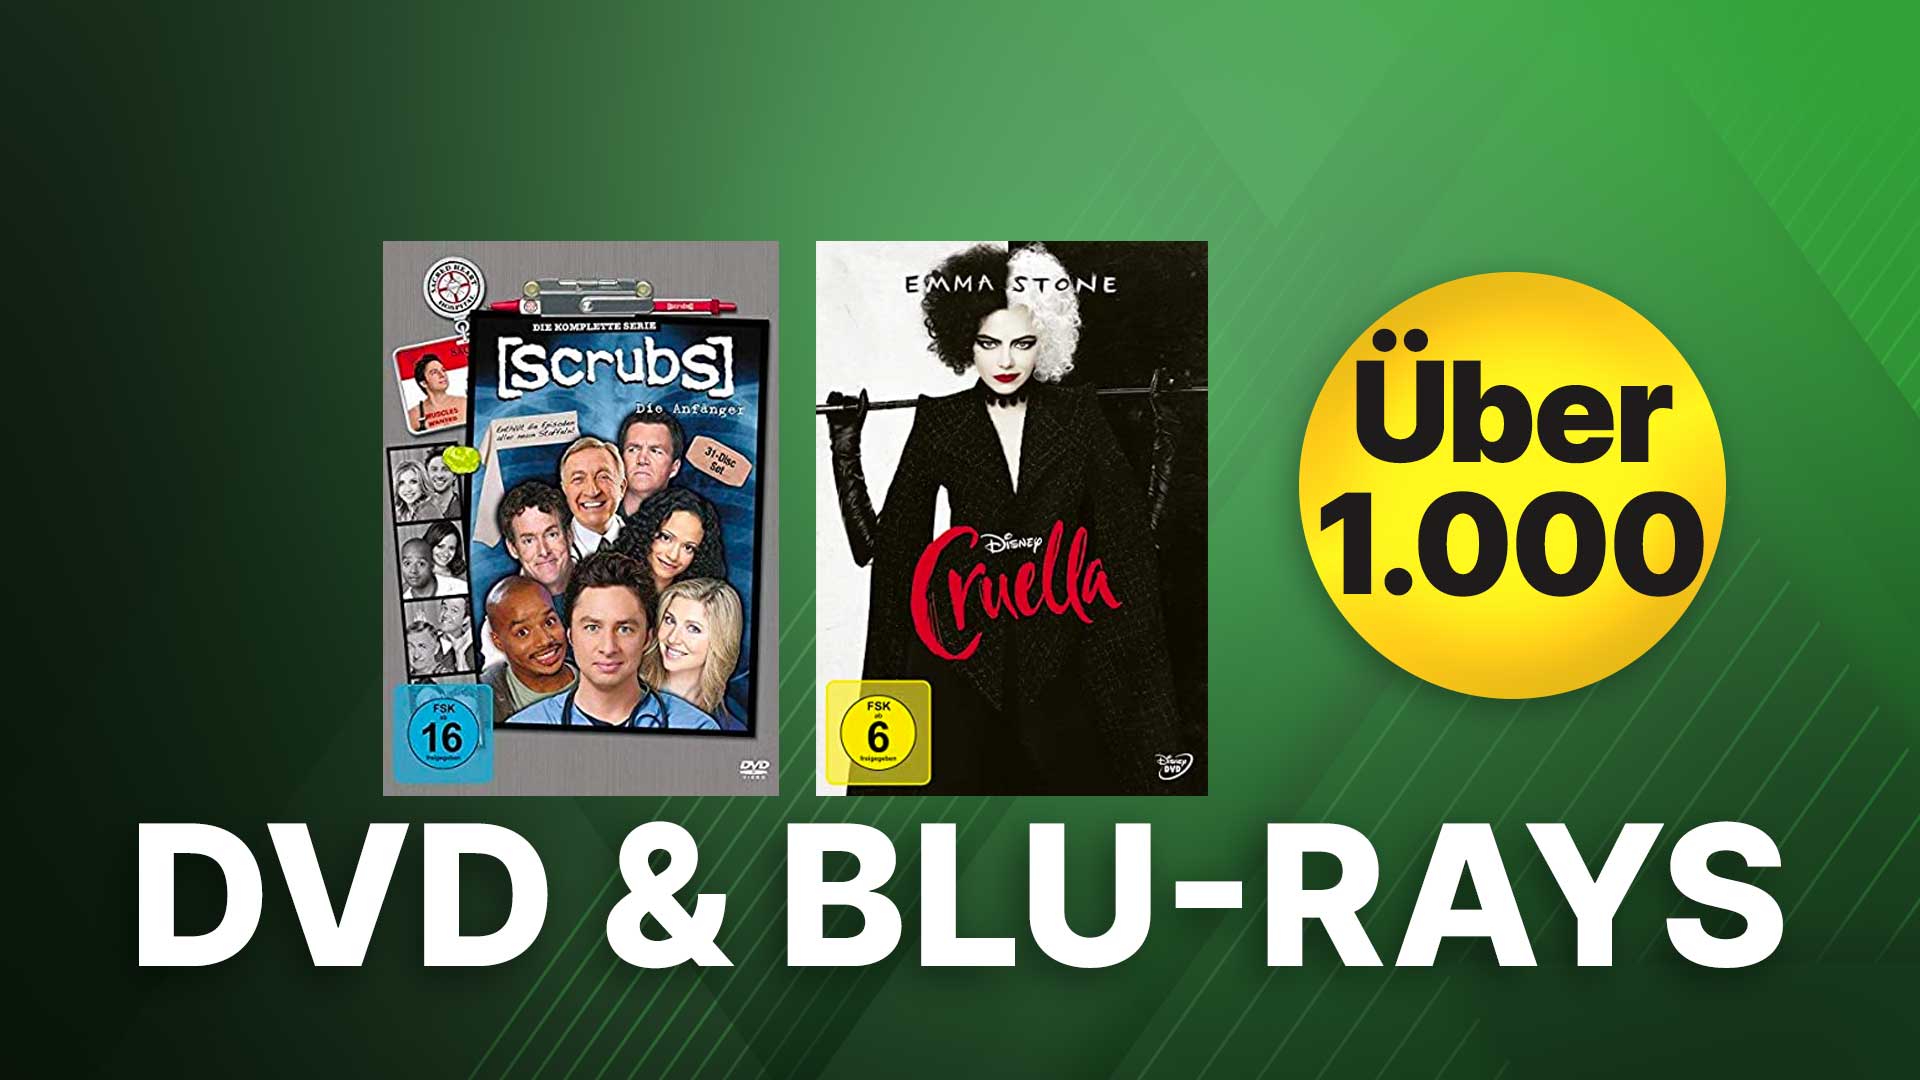 1,000 DVDs & Blu-rays on Amazon: Top series & films at the best price